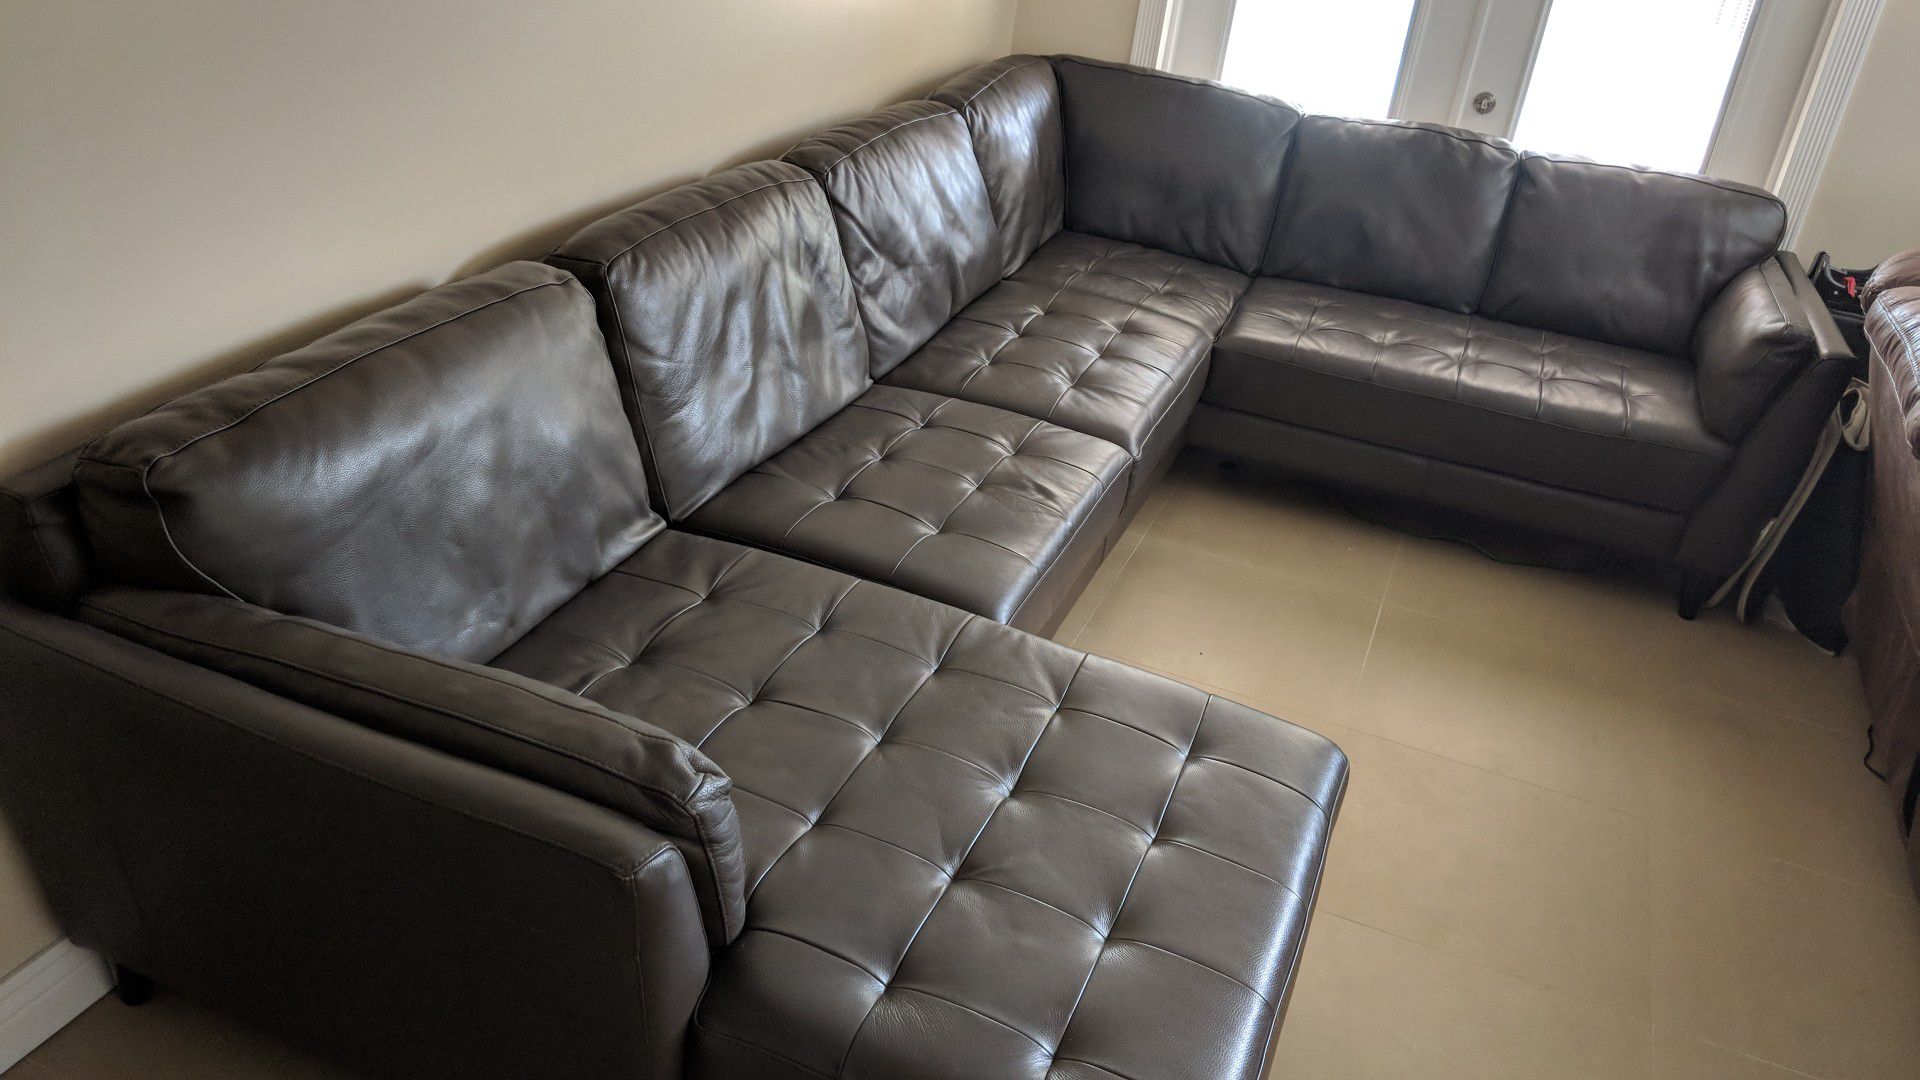 Oversized leather sectional